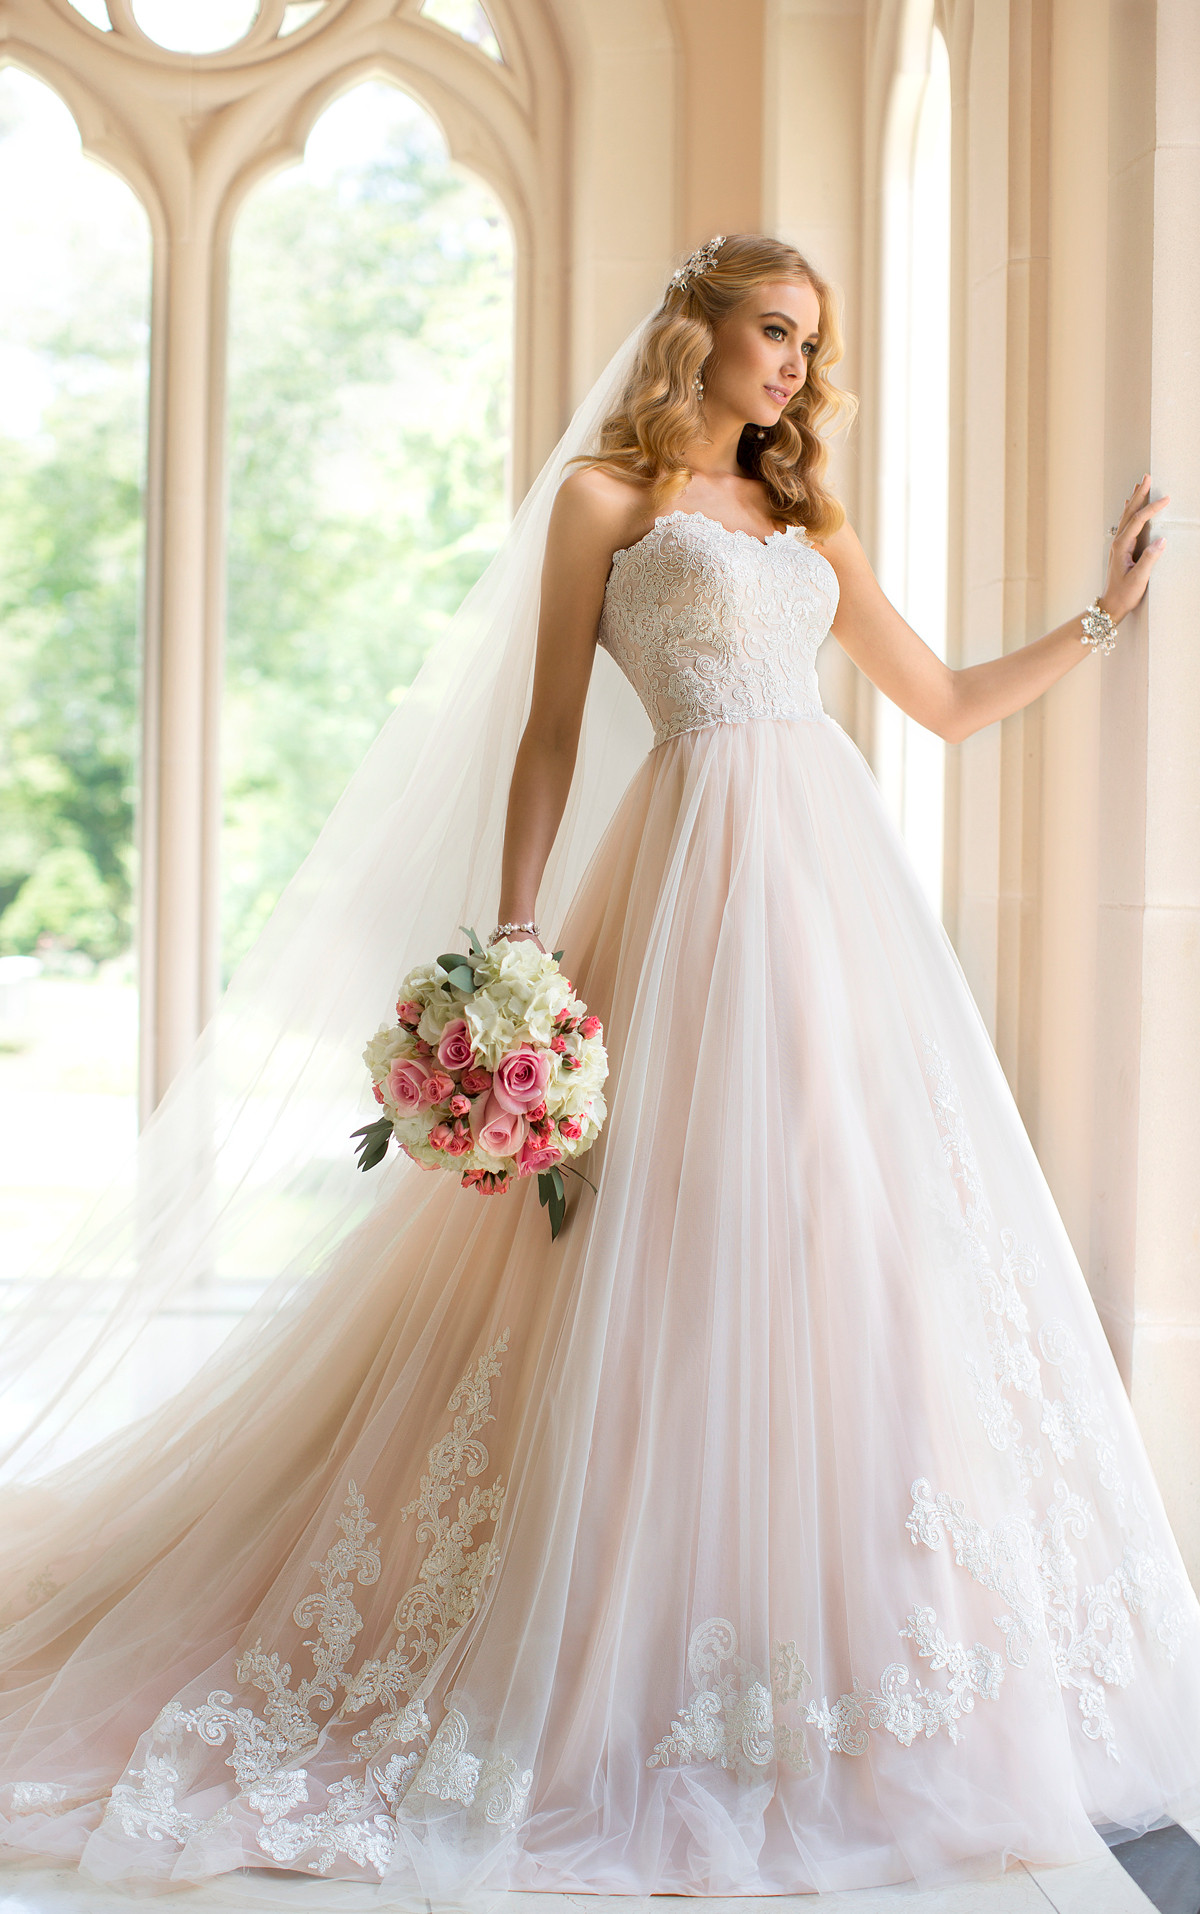 Wedding Gowns Designers
 The Best Gowns from The Most In Demand Wedding Dress